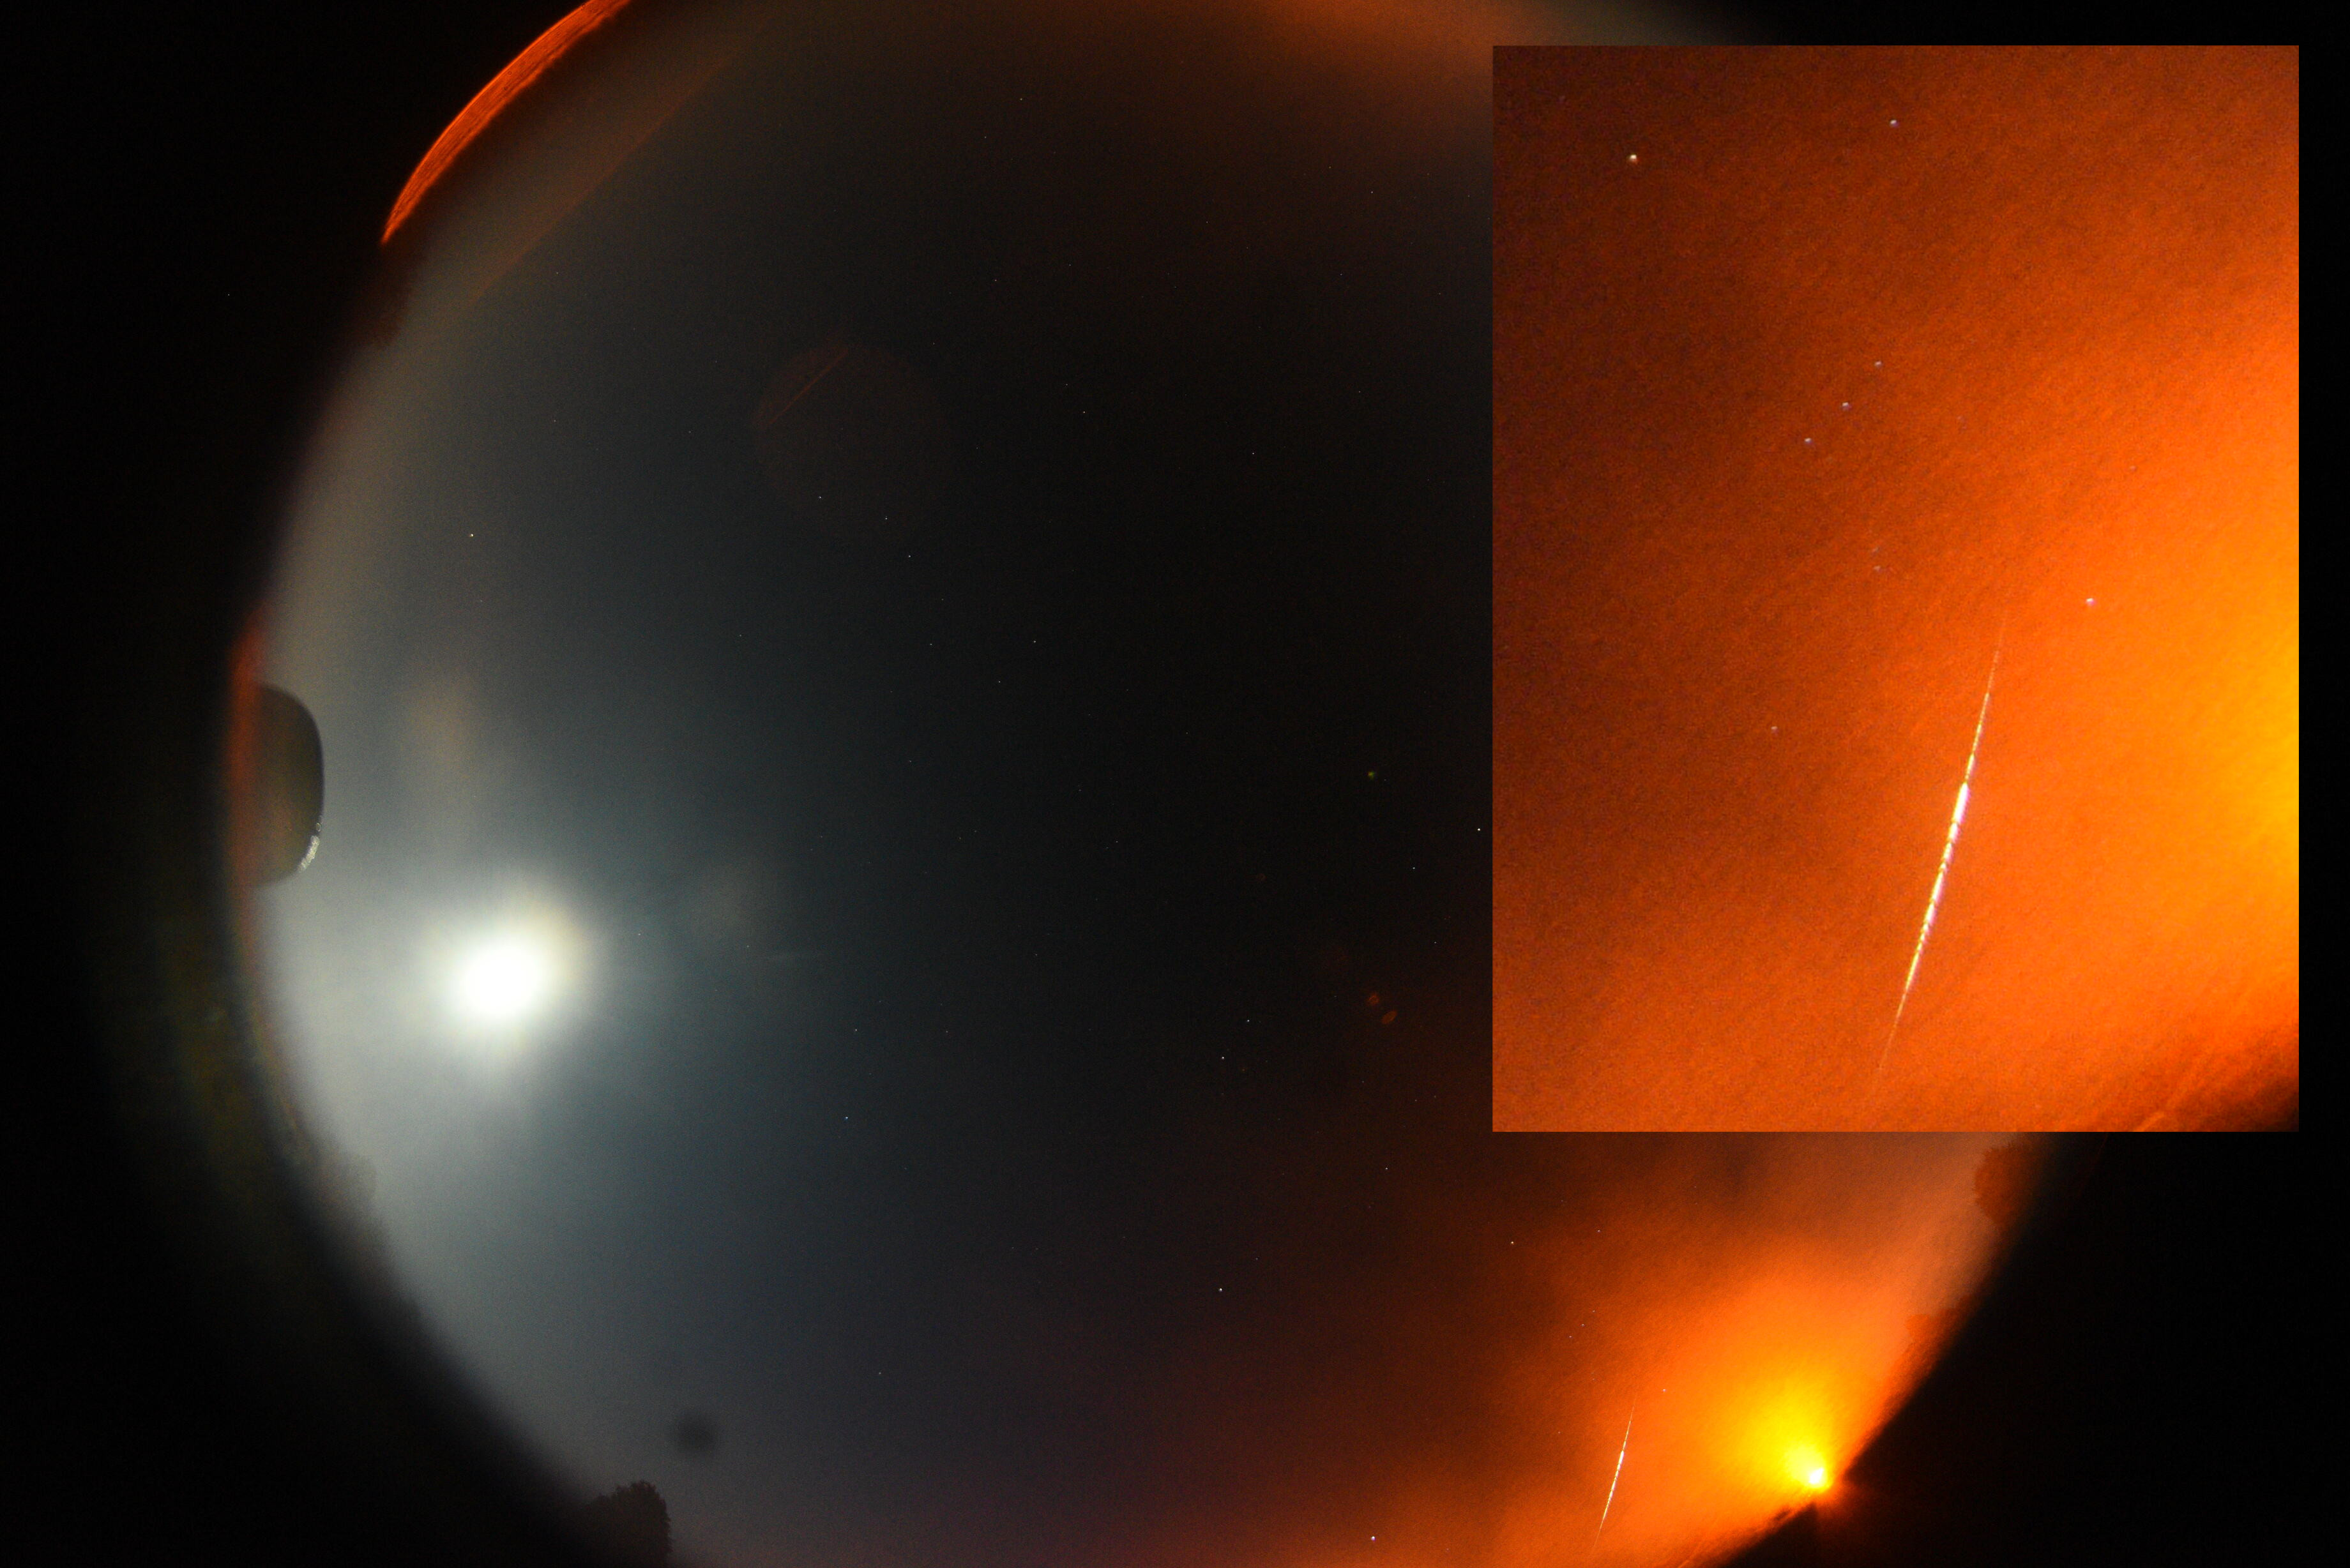 The fireball captured by the UKFN camera at Lincoln (credit: Sarah McMullan, UKFN, Global Fireball Observatory)